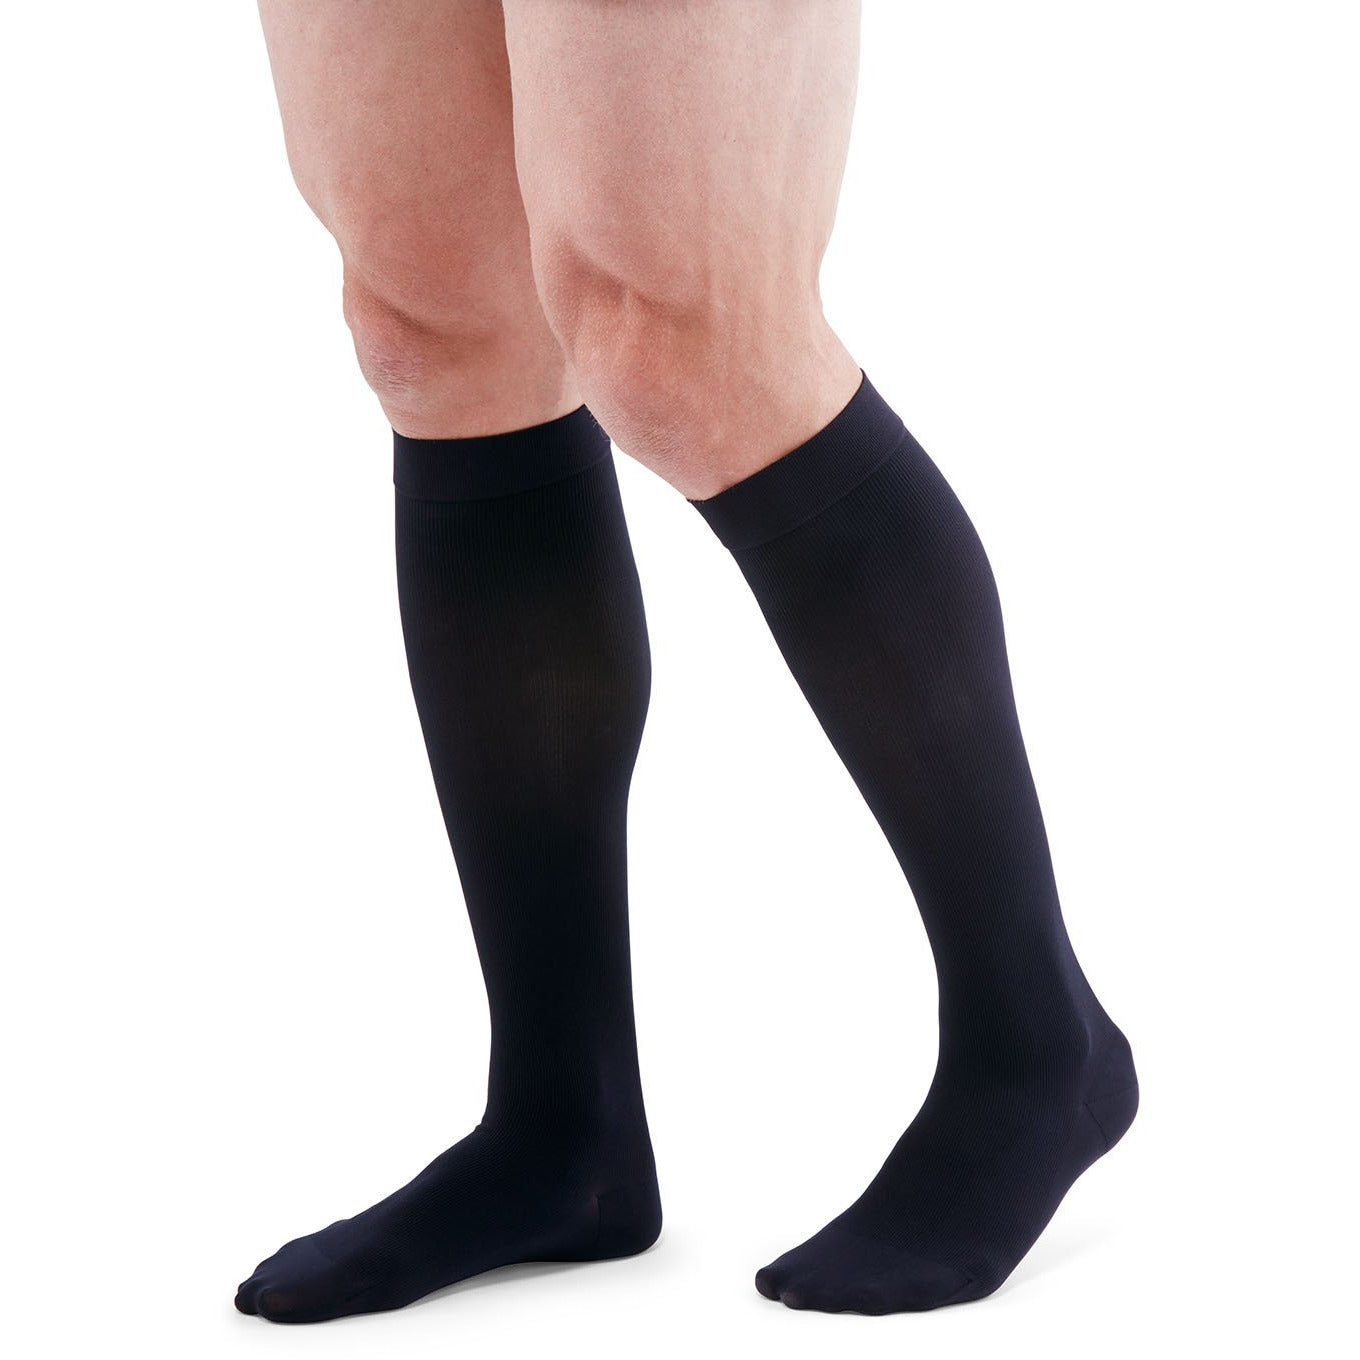 DUOMED soft compression tights